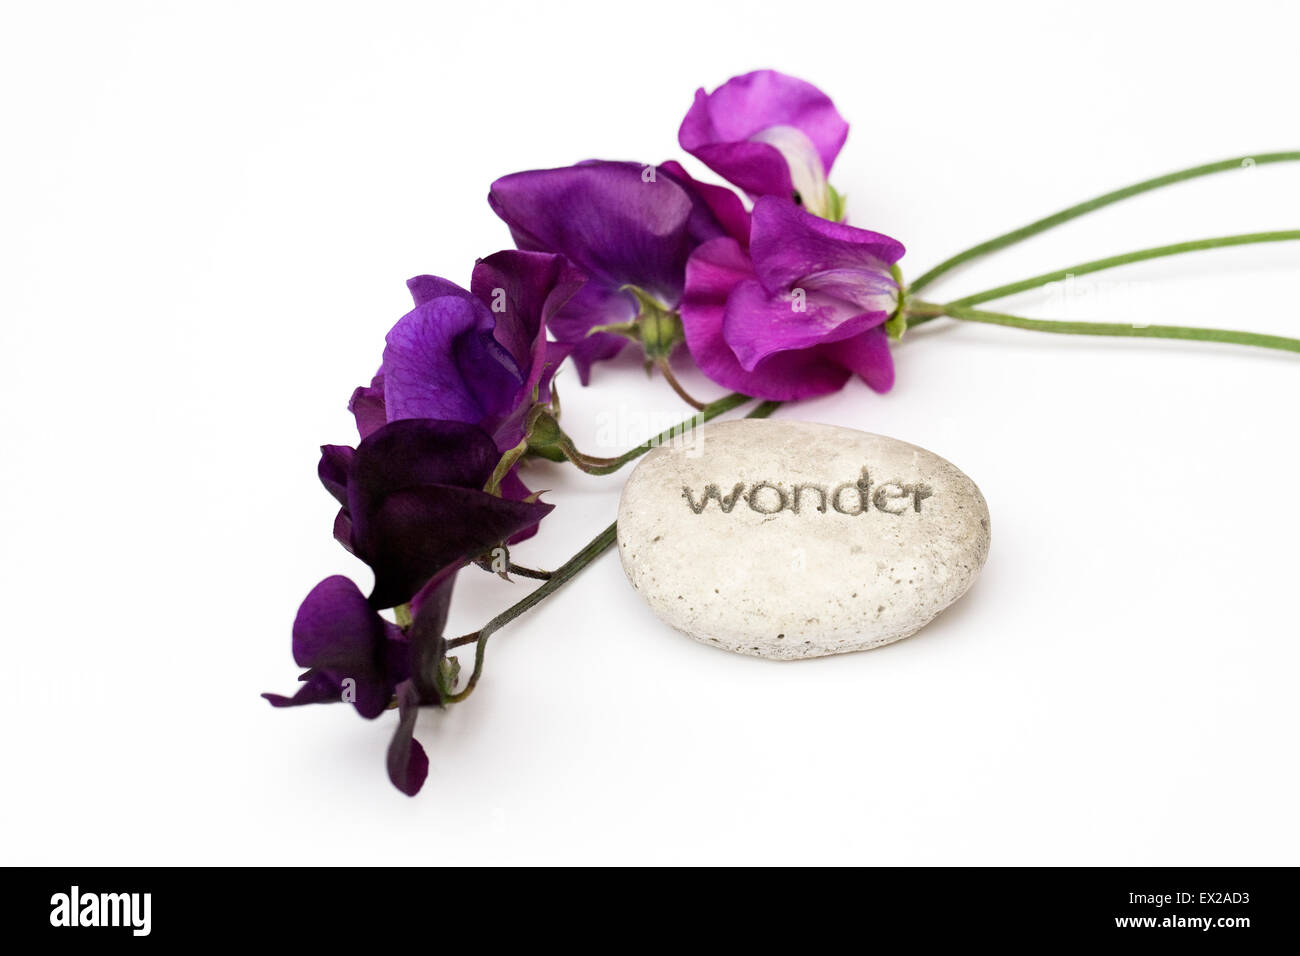 Lathyrus odoratus. Sweet pea flowers and a pebble with the word wonder engraved on it against a white background. Stock Photo